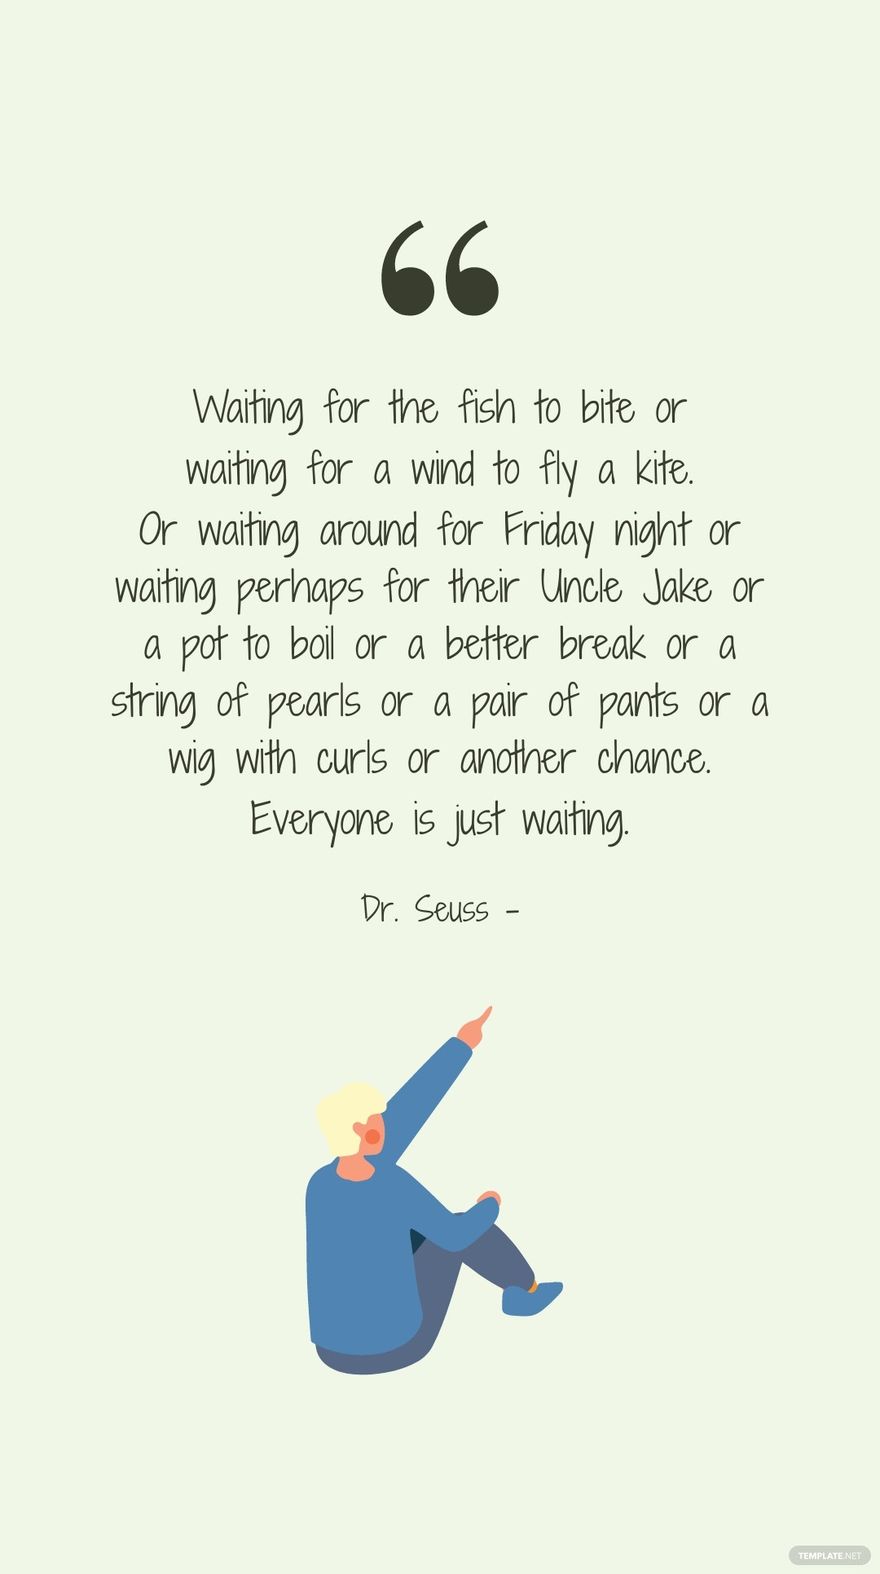 Dr. Seuss - Waiting for the fish to bite or waiting for a wind to fly a kite. Or waiting around for Friday night or waiting perhaps for their Uncle Jake or a pot to boil or a better break or a string 